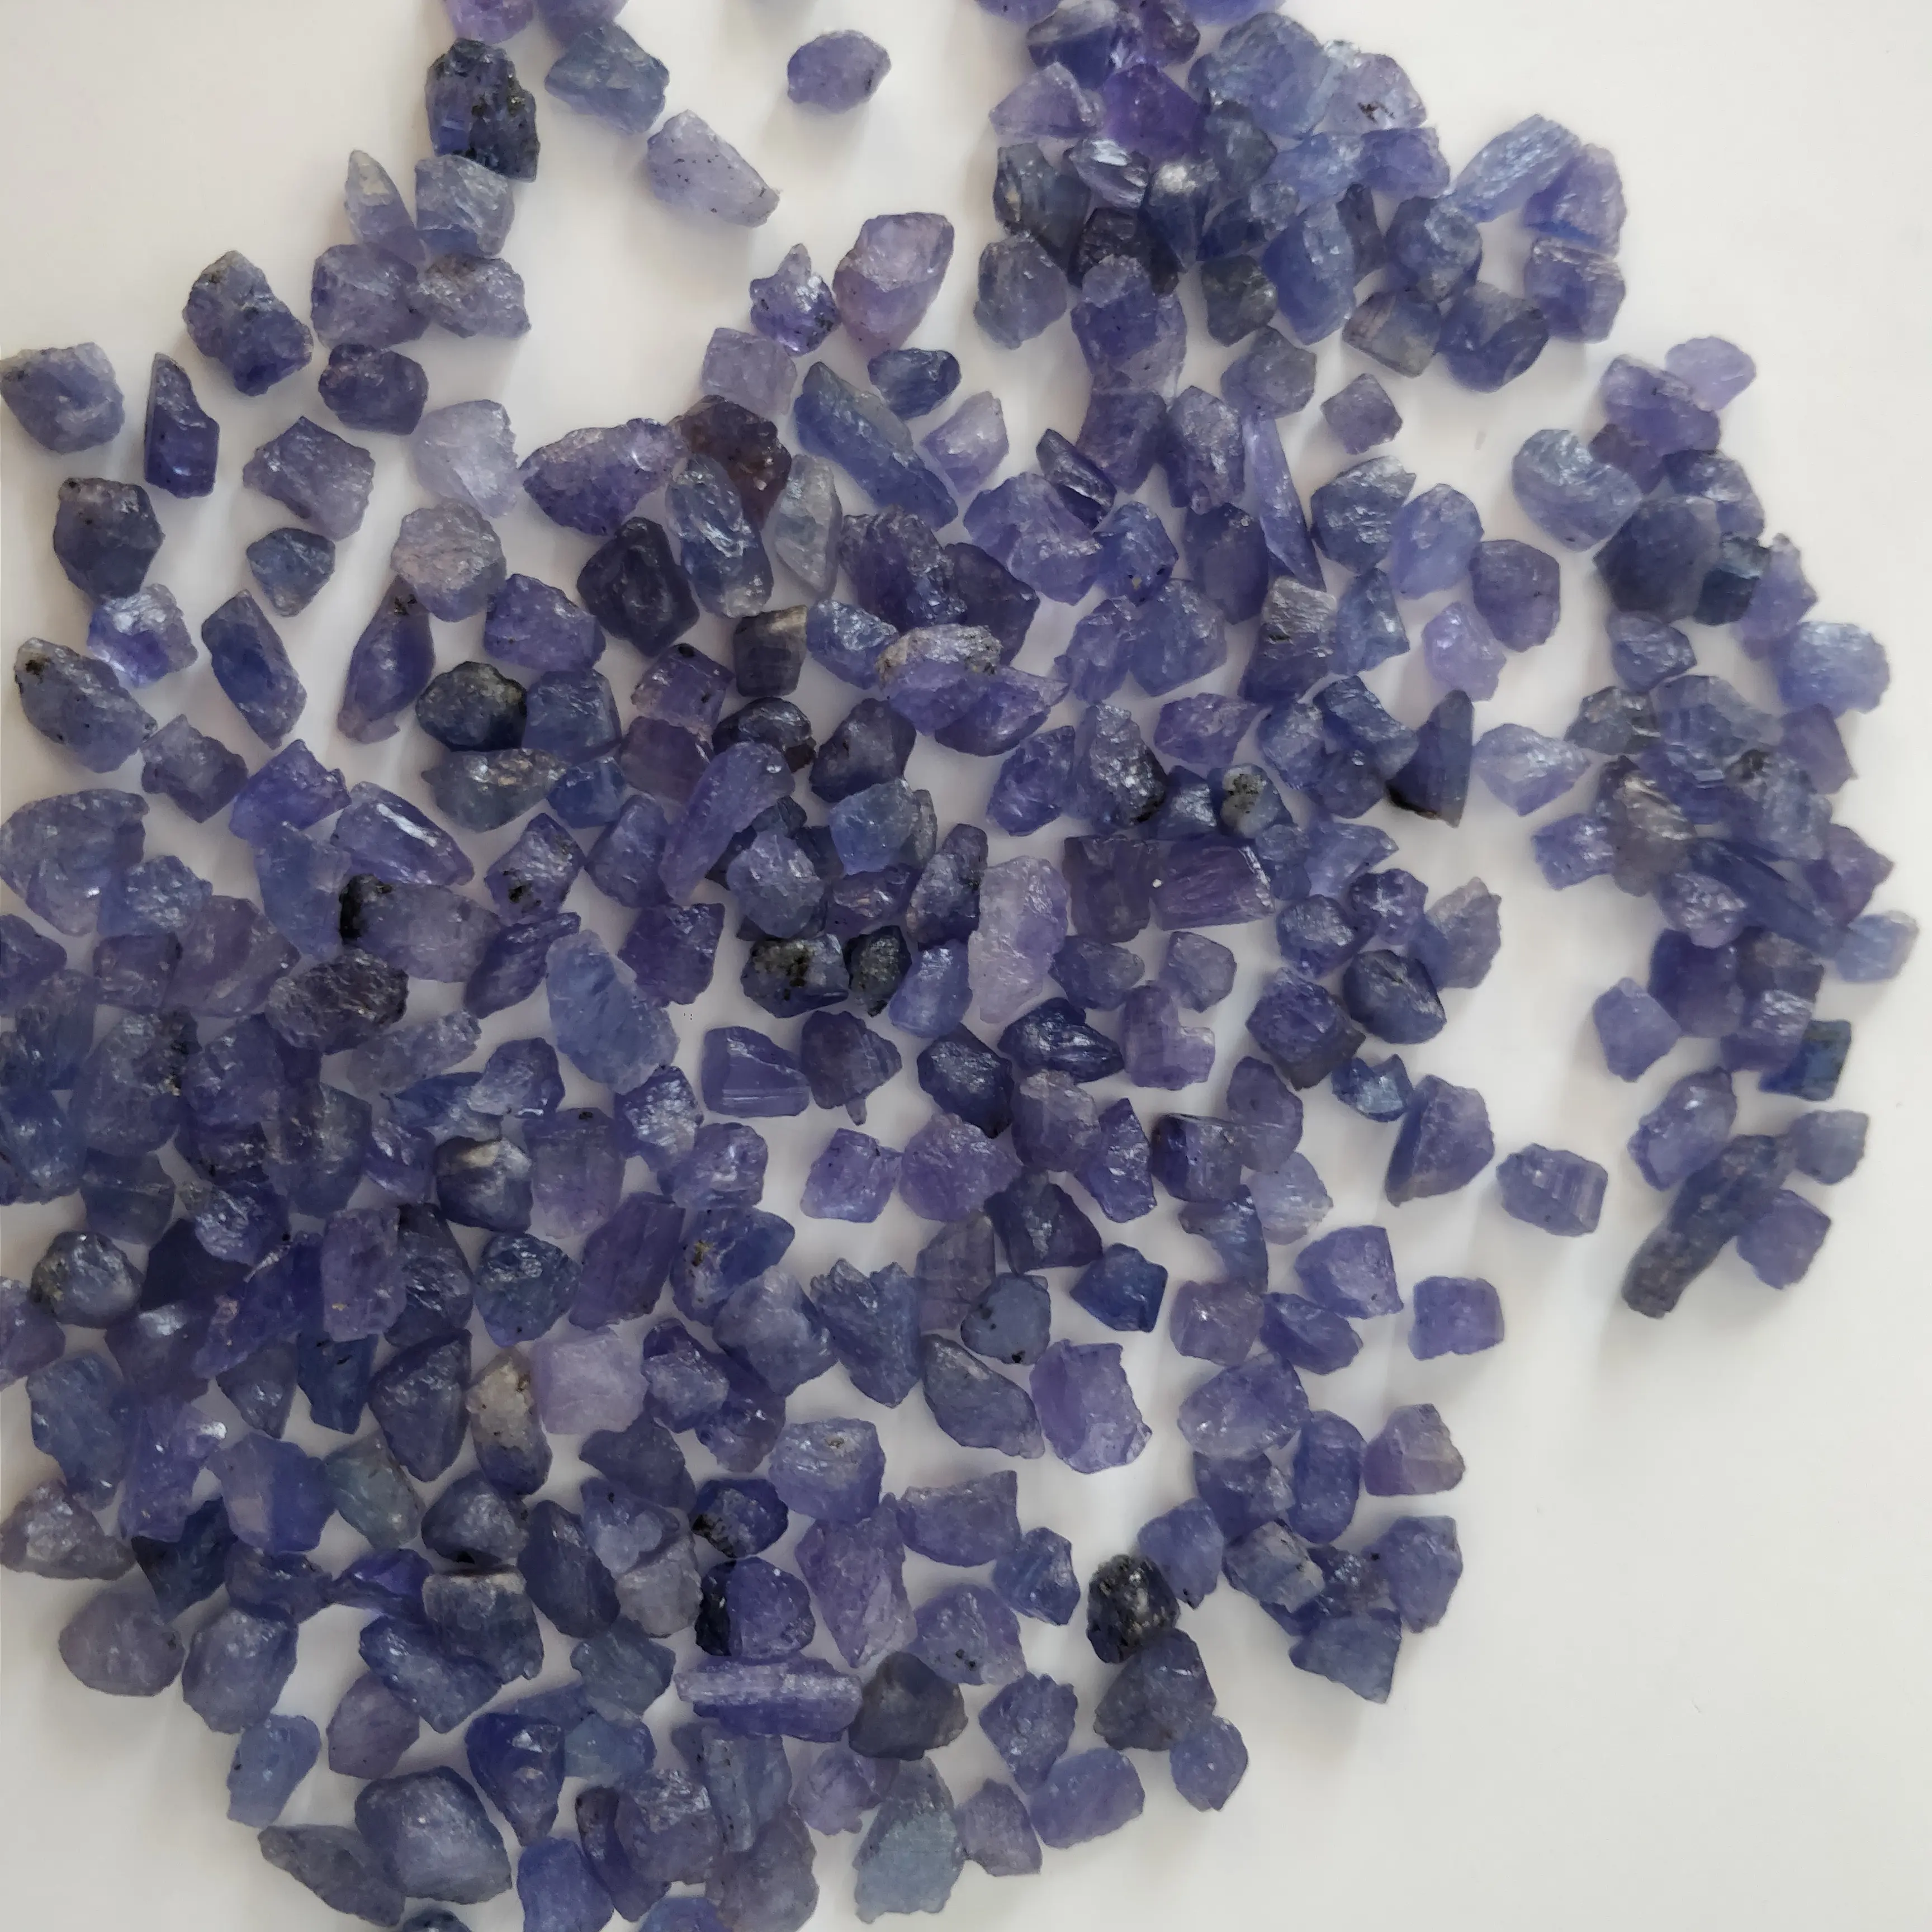 Precious Stone Tanzanite Natural Gemstone Material Mohan Gems Tanzanite Rough Directly from Manufacturer GRMR26 Pls Contact Us